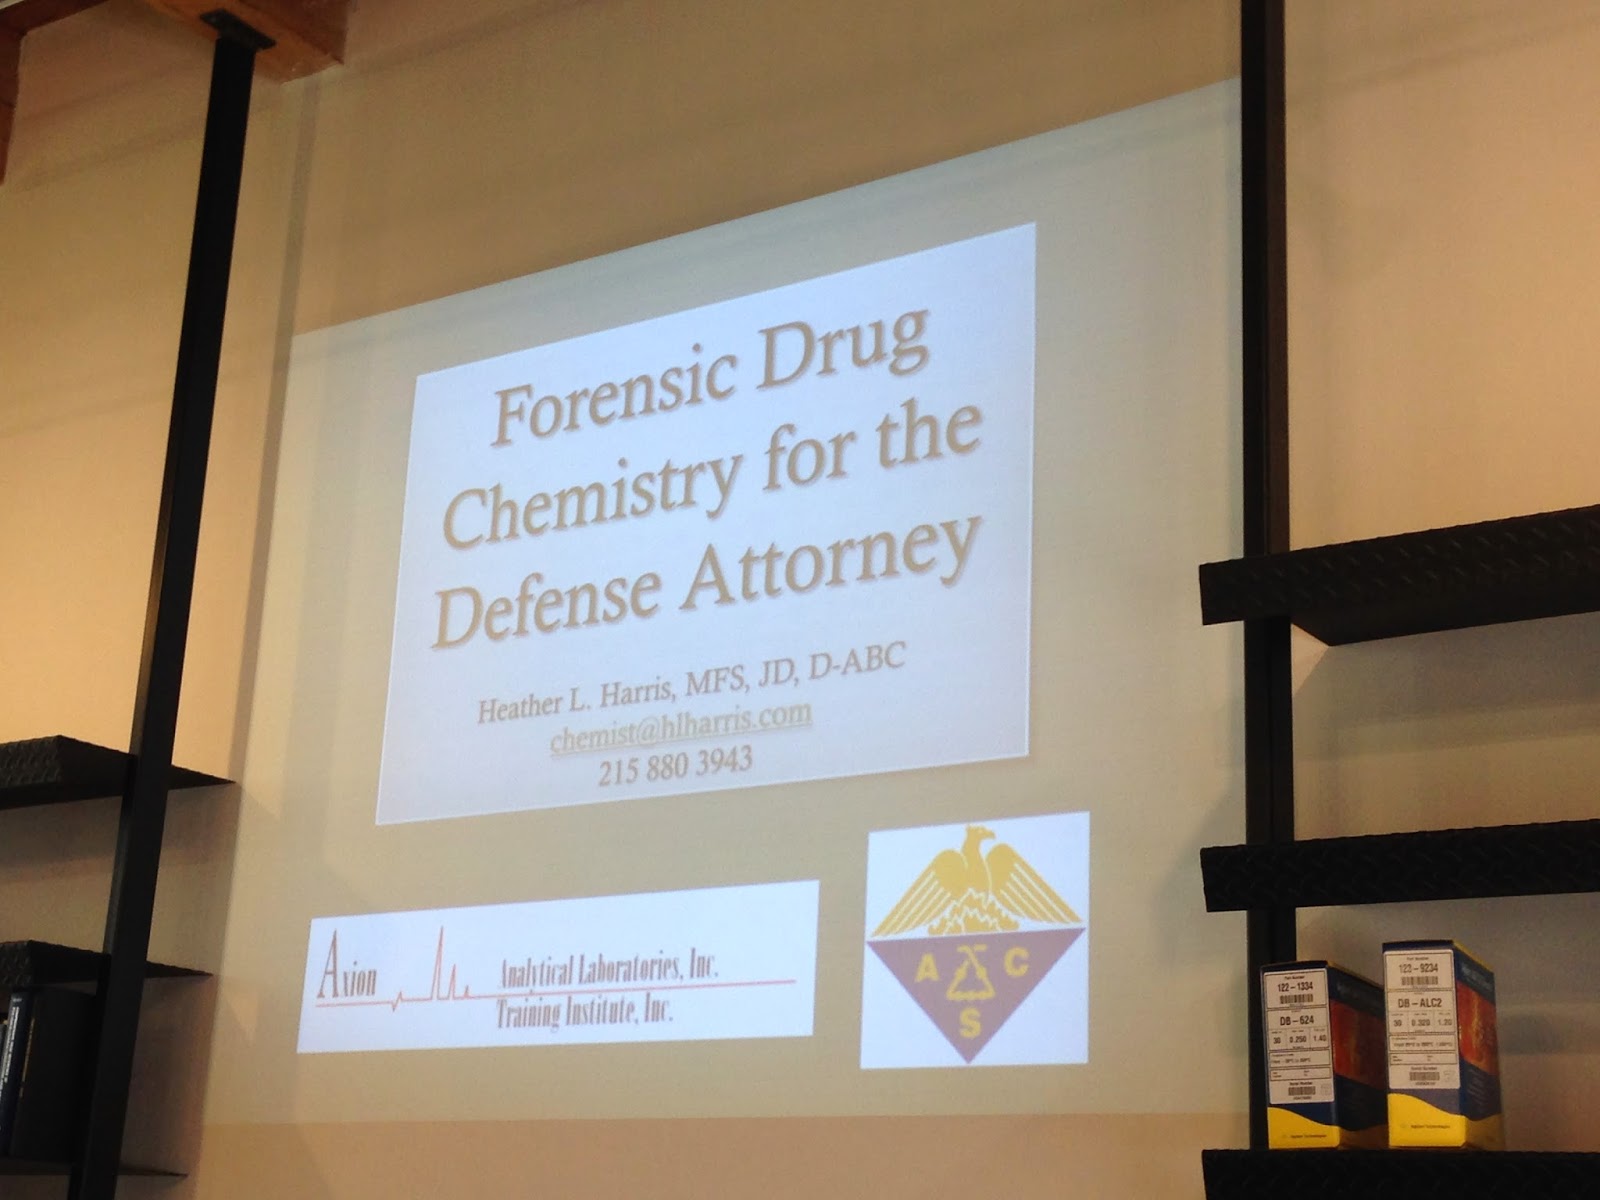 Deandra Grant at the Forensic Drug Analysis IV Training Course